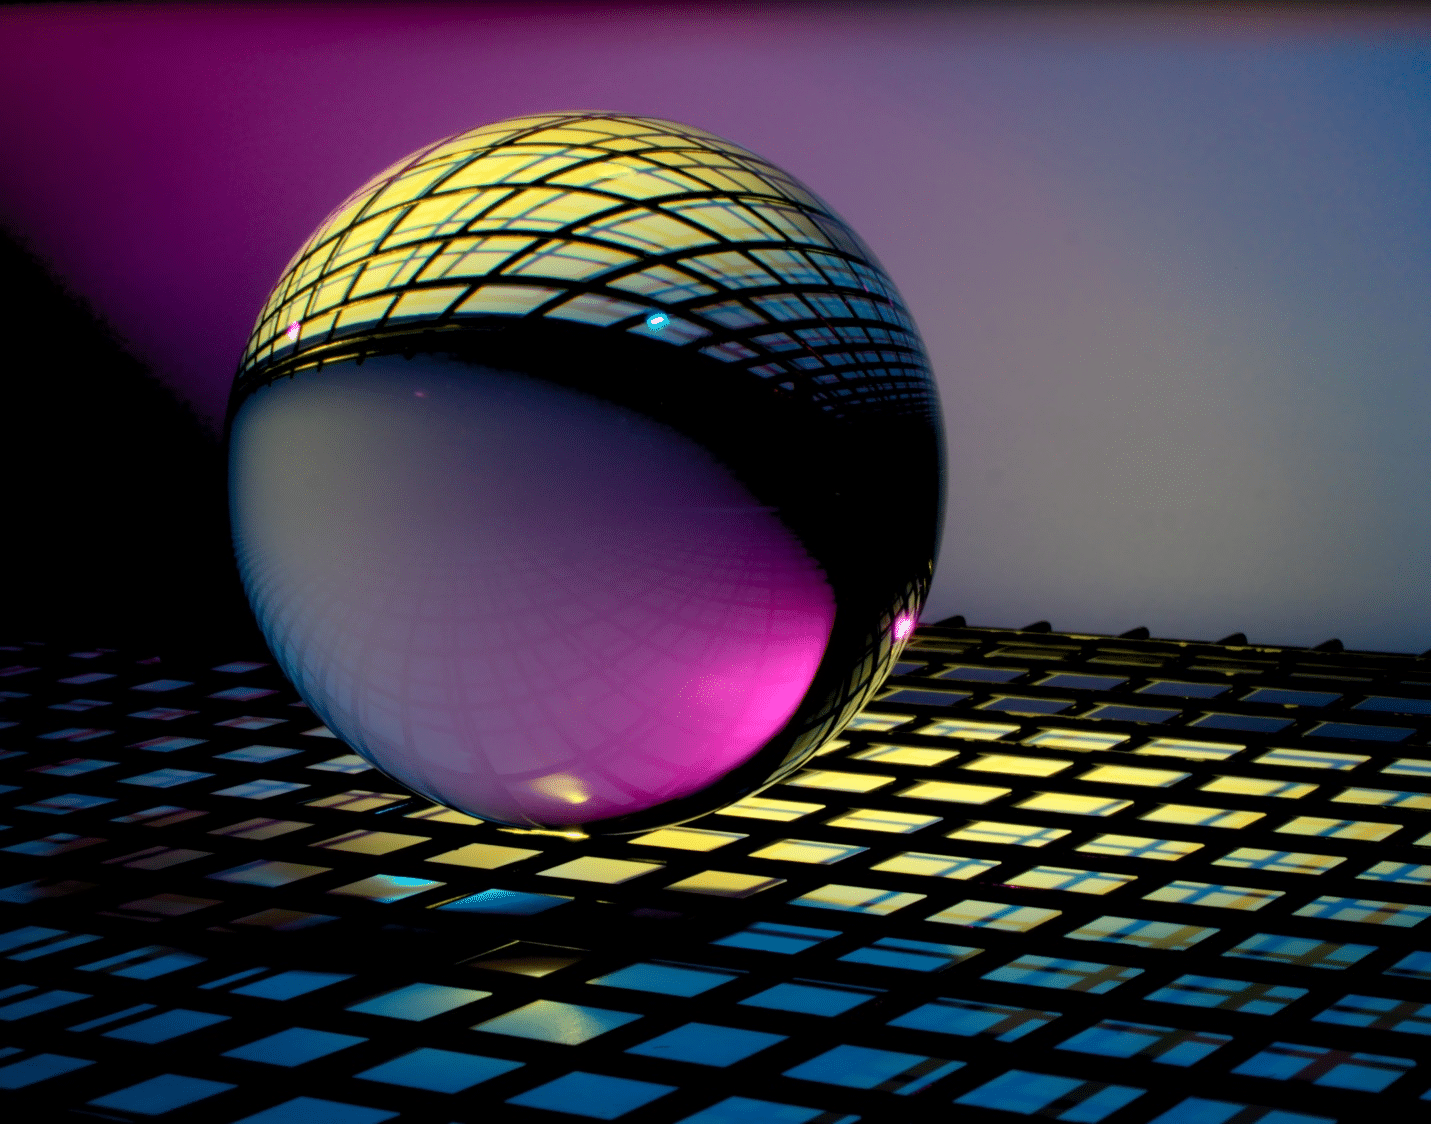 A photo of a futuristic-looking sphere